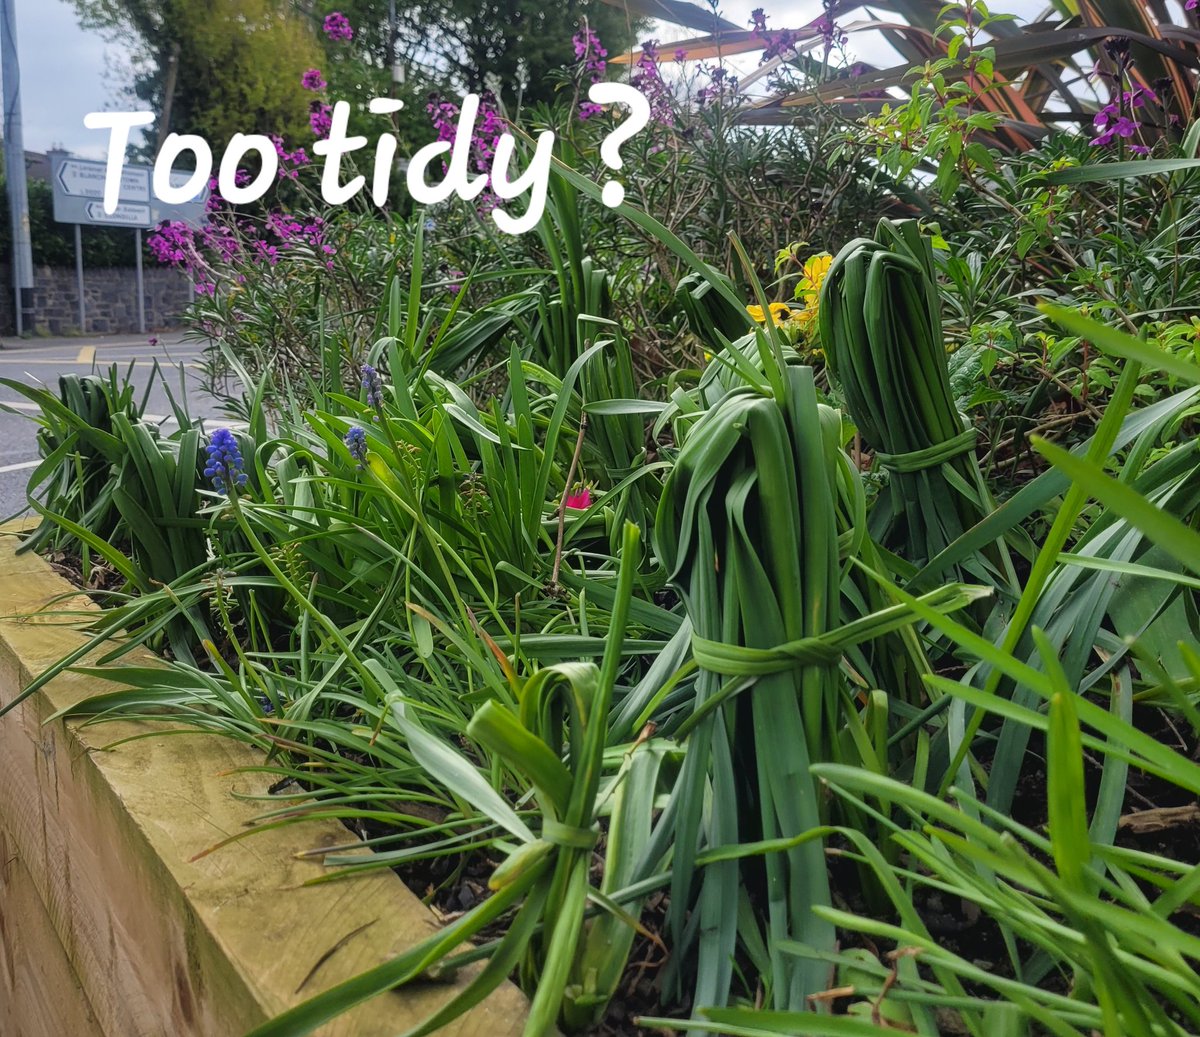 Sometimes a Tidy Towns is too tidy?
Knotting daffodils is not recommended by @The_RHS, 'reduces plant's ability to function'
@gapireland
@mickkellygrows
#daffodils #tidytowns #tidy #giy